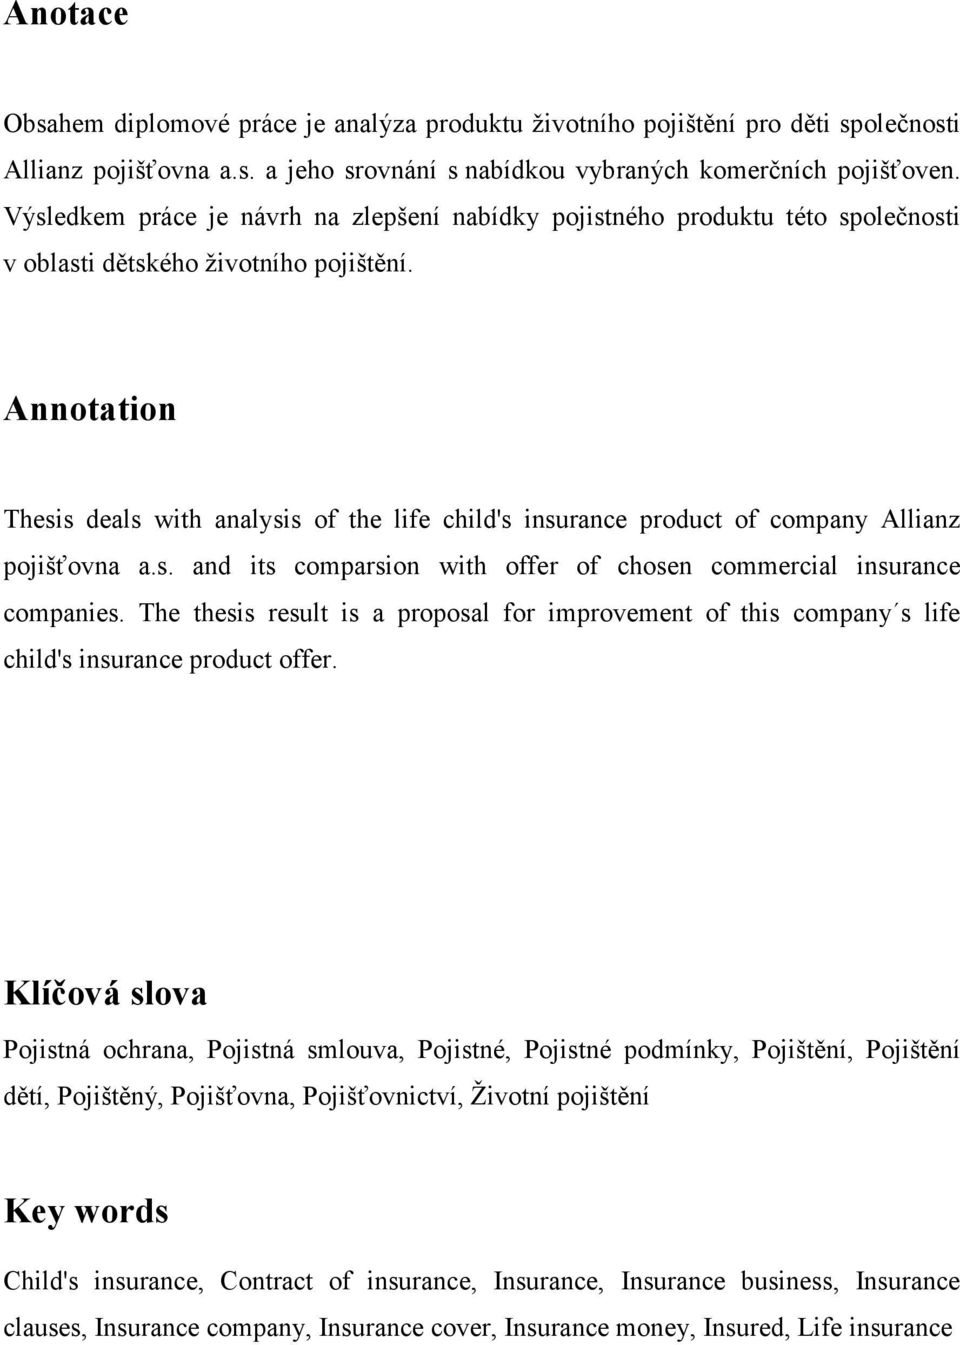 Annotation Thesis deals with analysis of the life child's insurance product of company Allianz pojišťovna a.s. and its comparsion with offer of chosen commercial insurance companies.